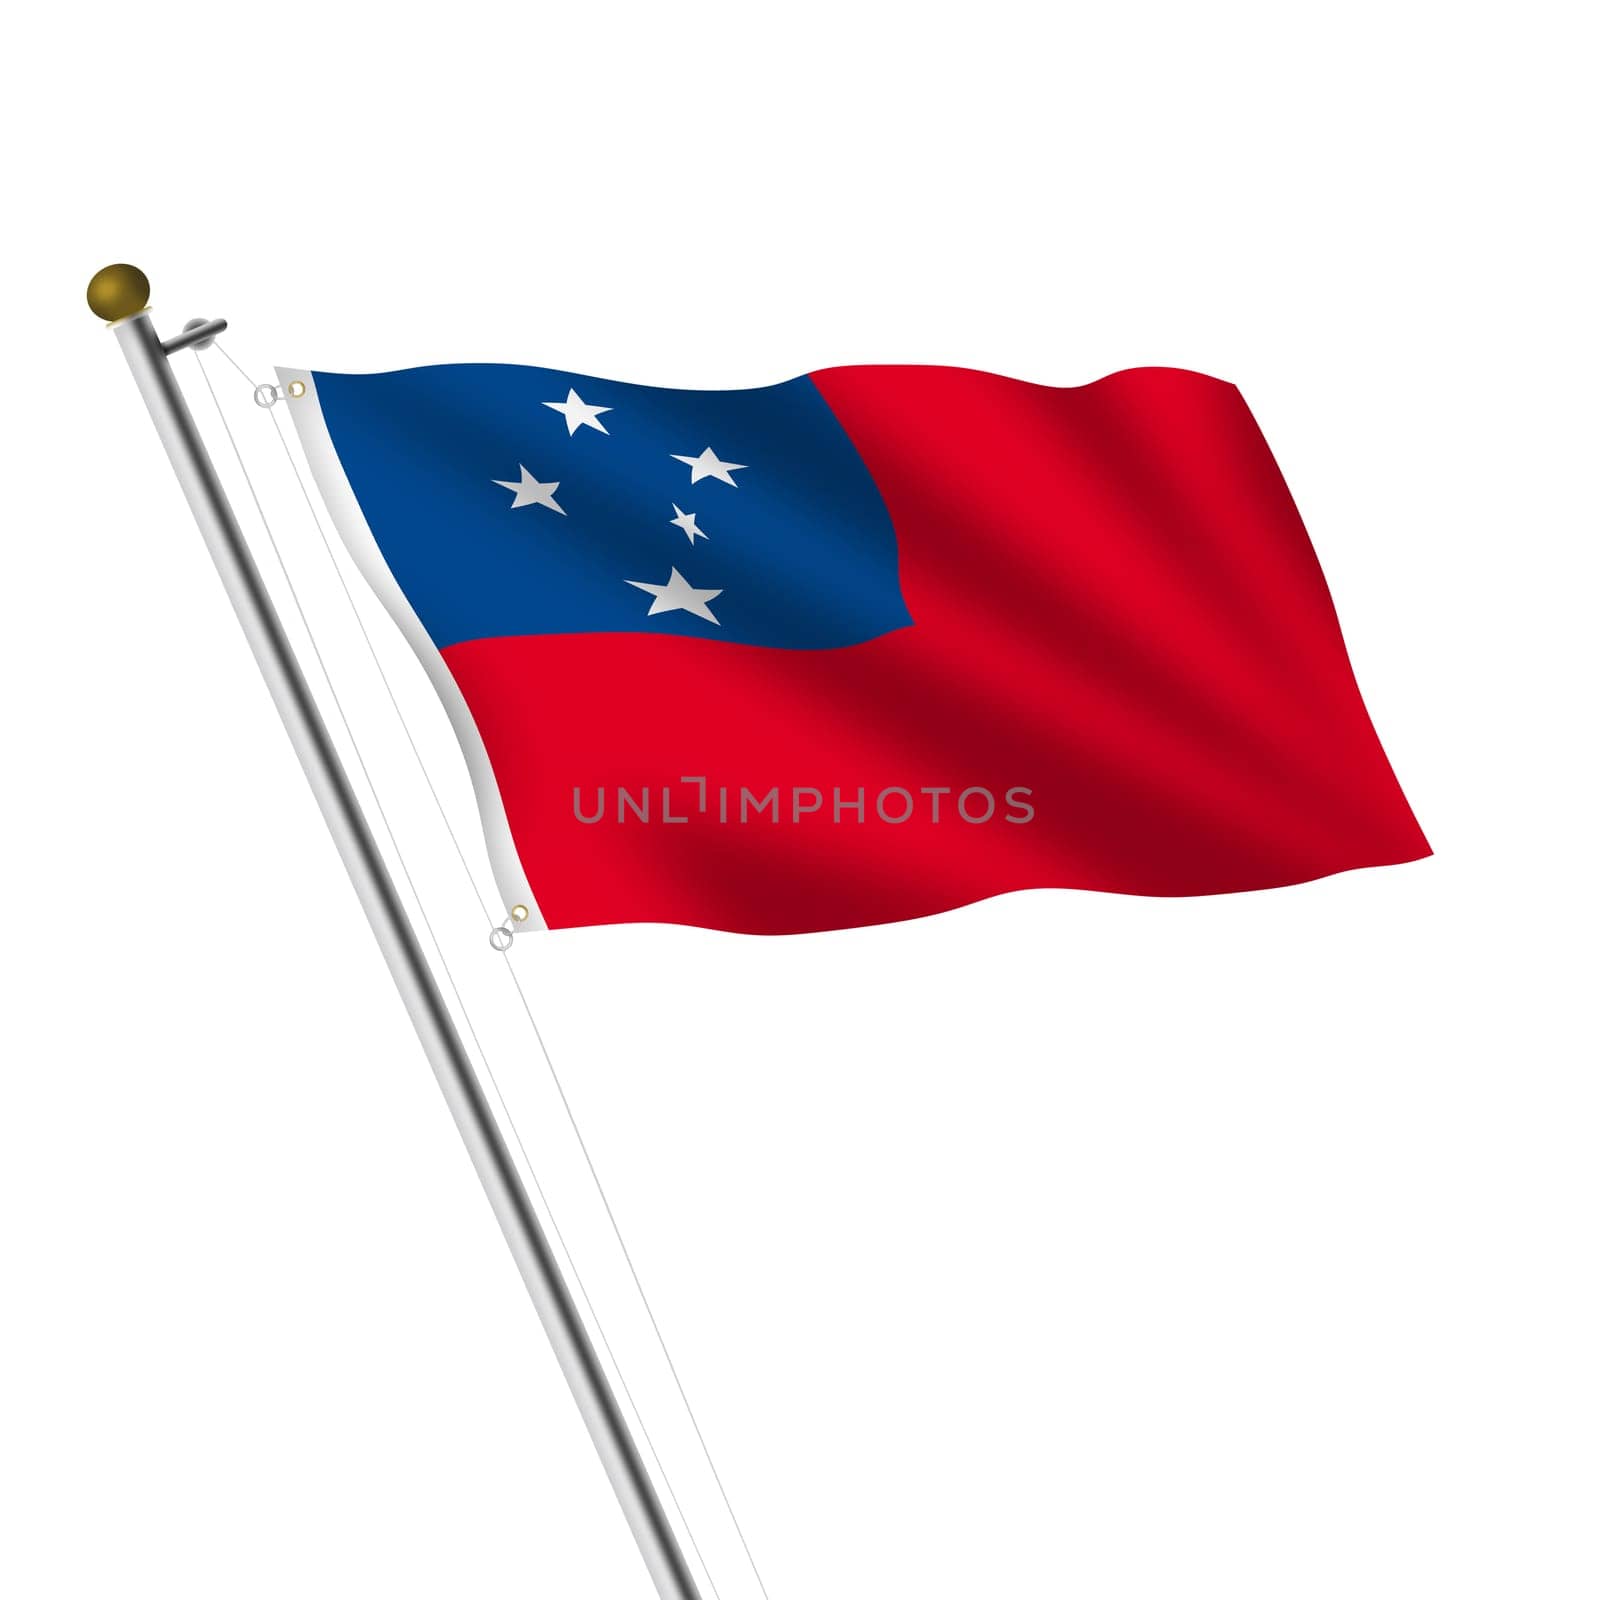 Western Samoa flagpole with clipping path by VivacityImages